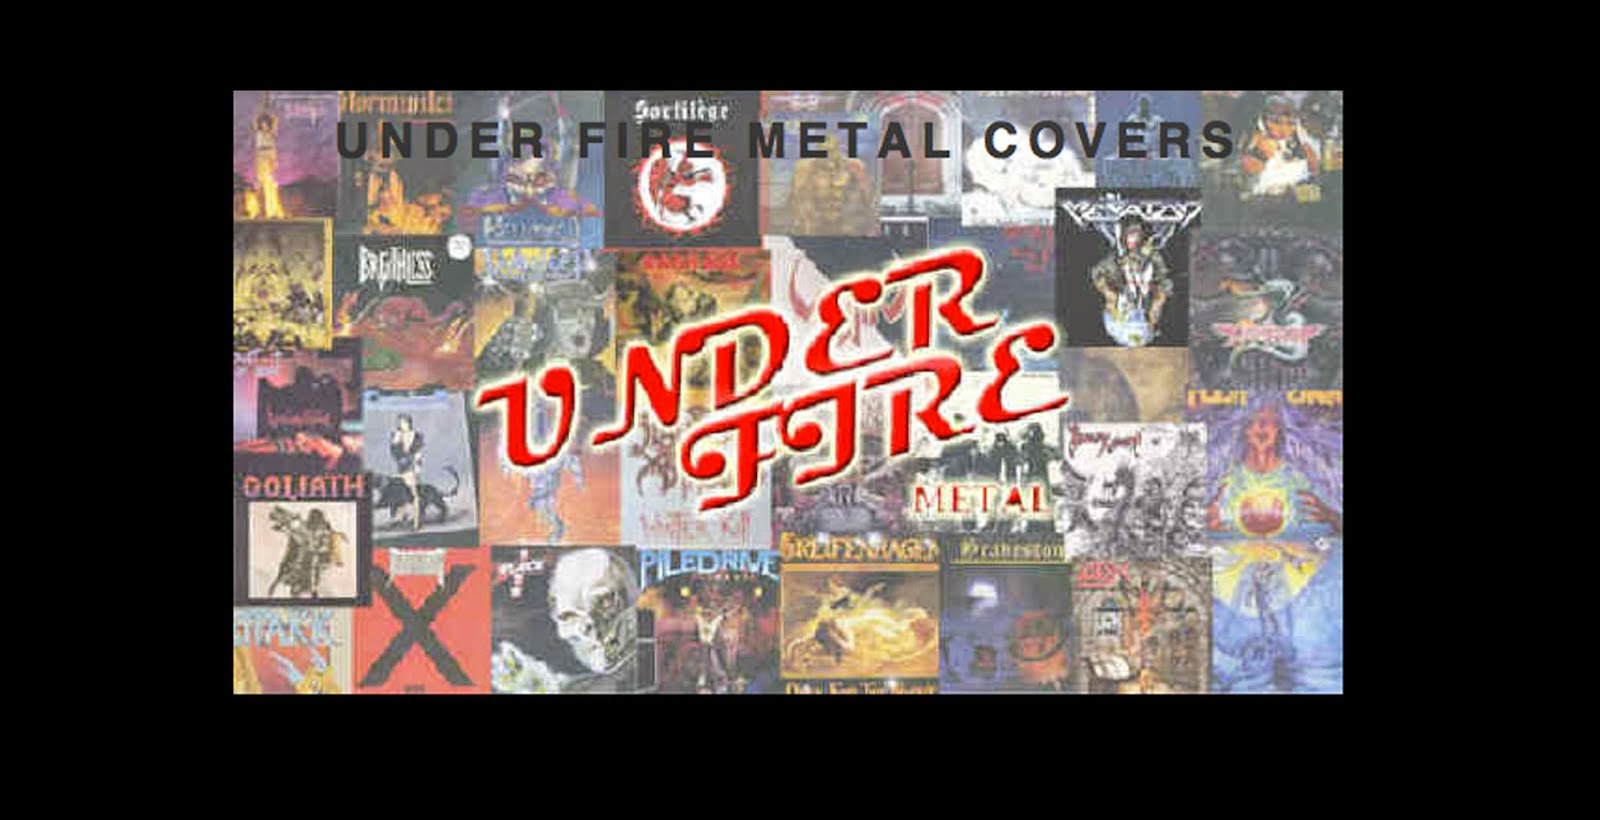 Under Fire Metal Covers